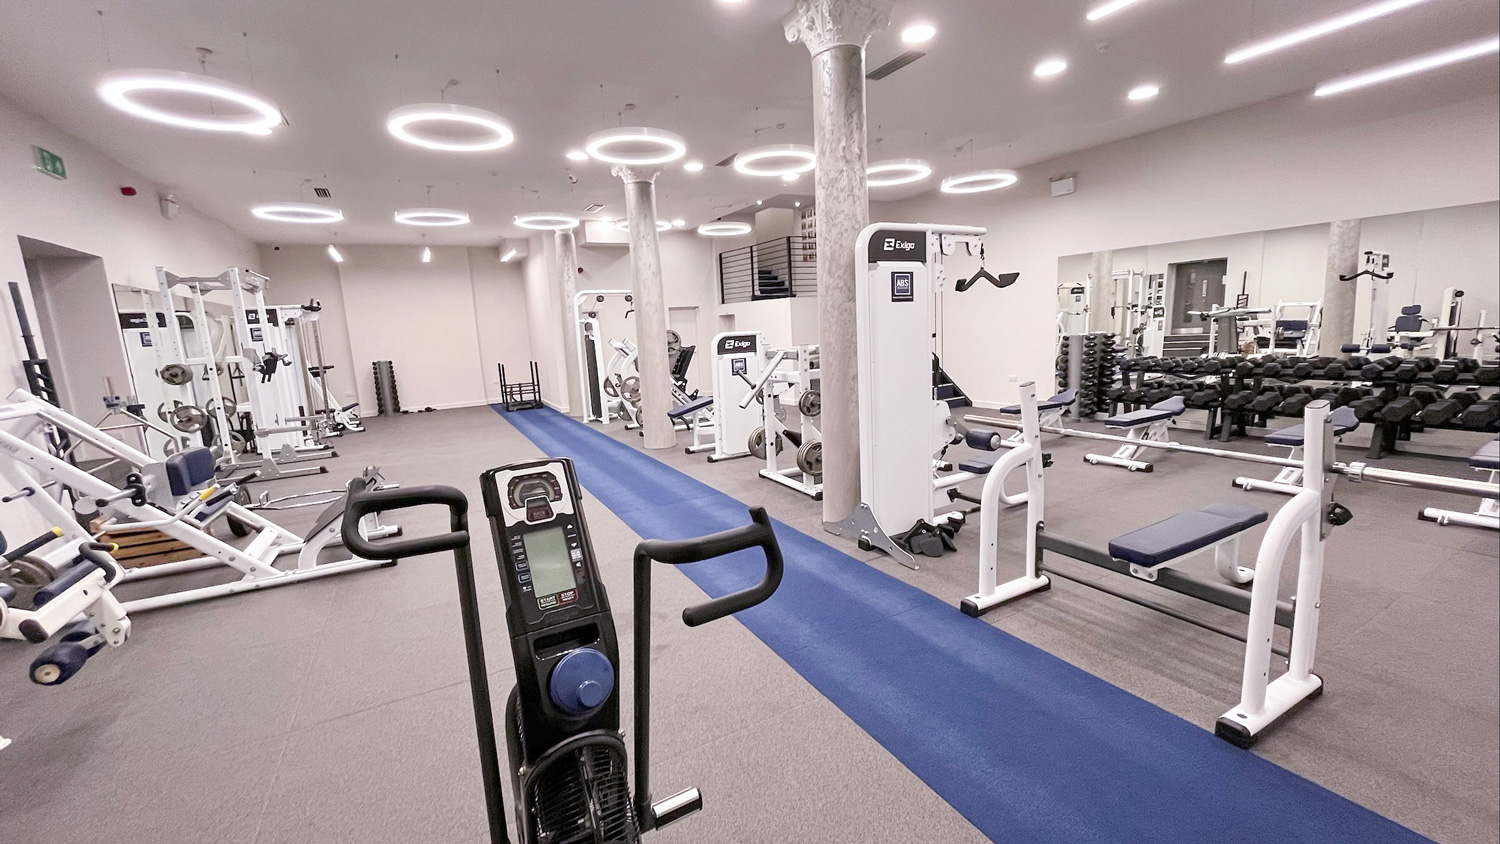 ABS personal training gym in Liverpool